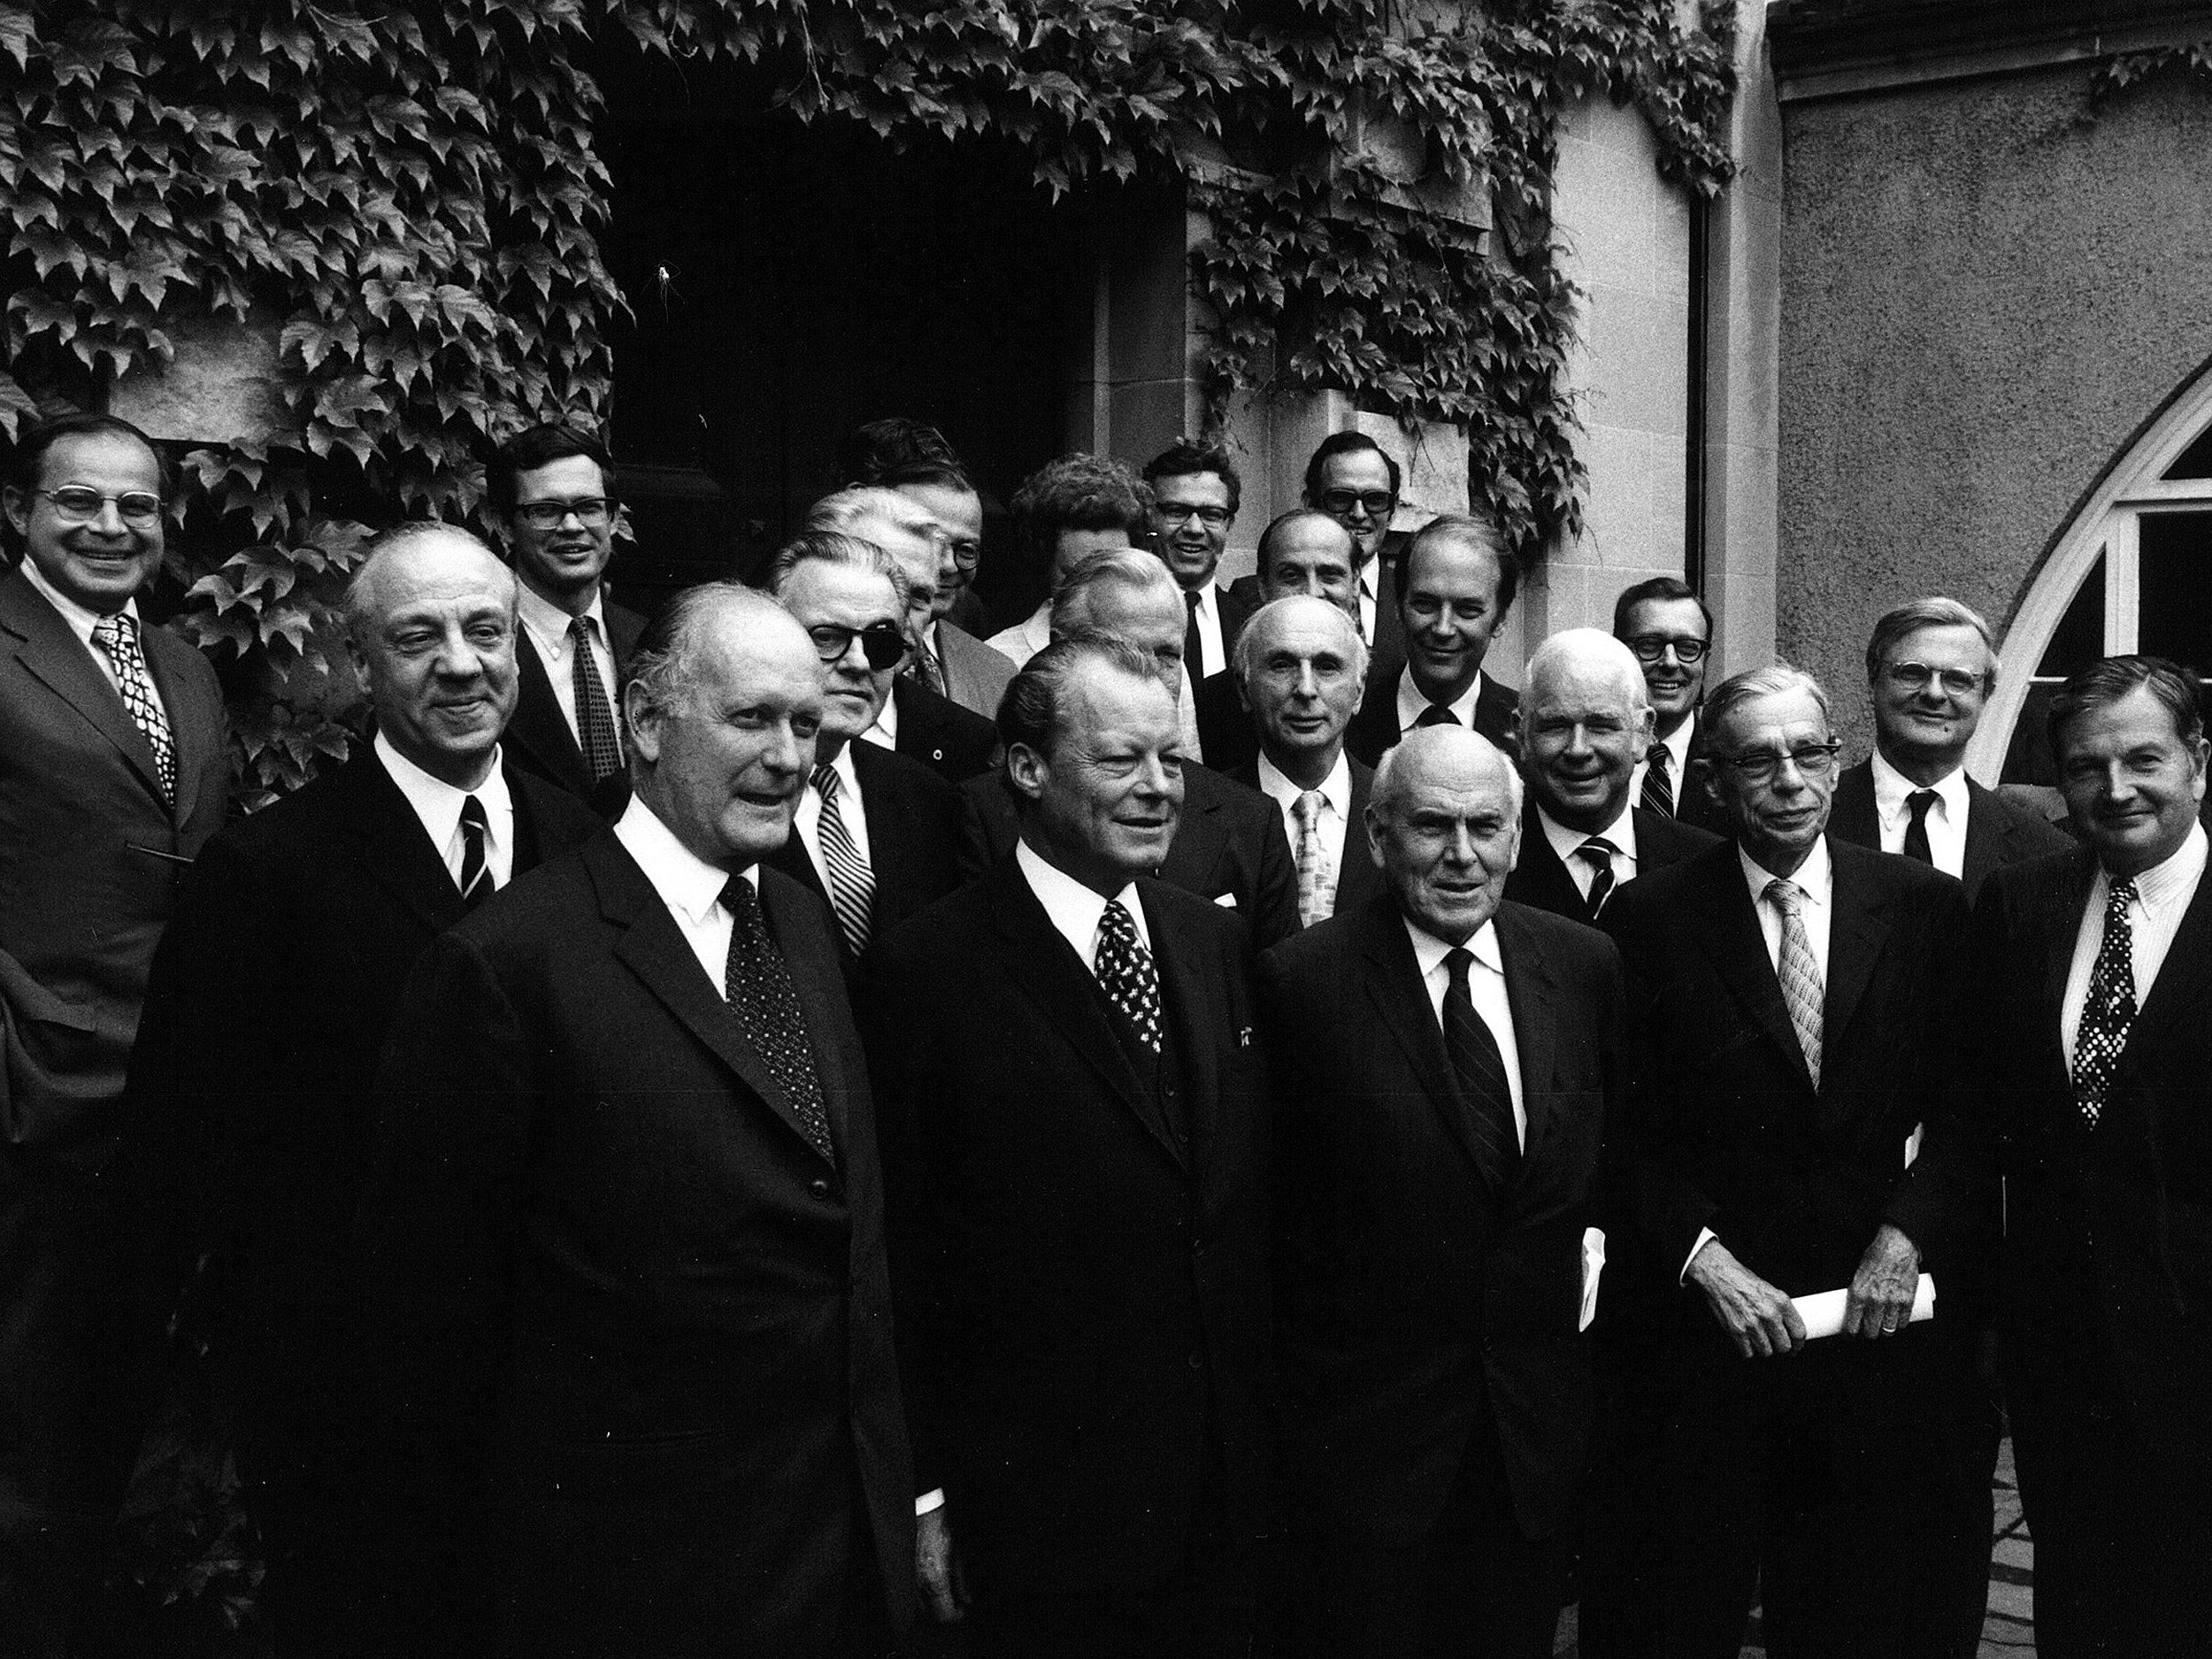 Group photo of dignitaries at the founding ceremony of the German Marshall Fund in 1972.